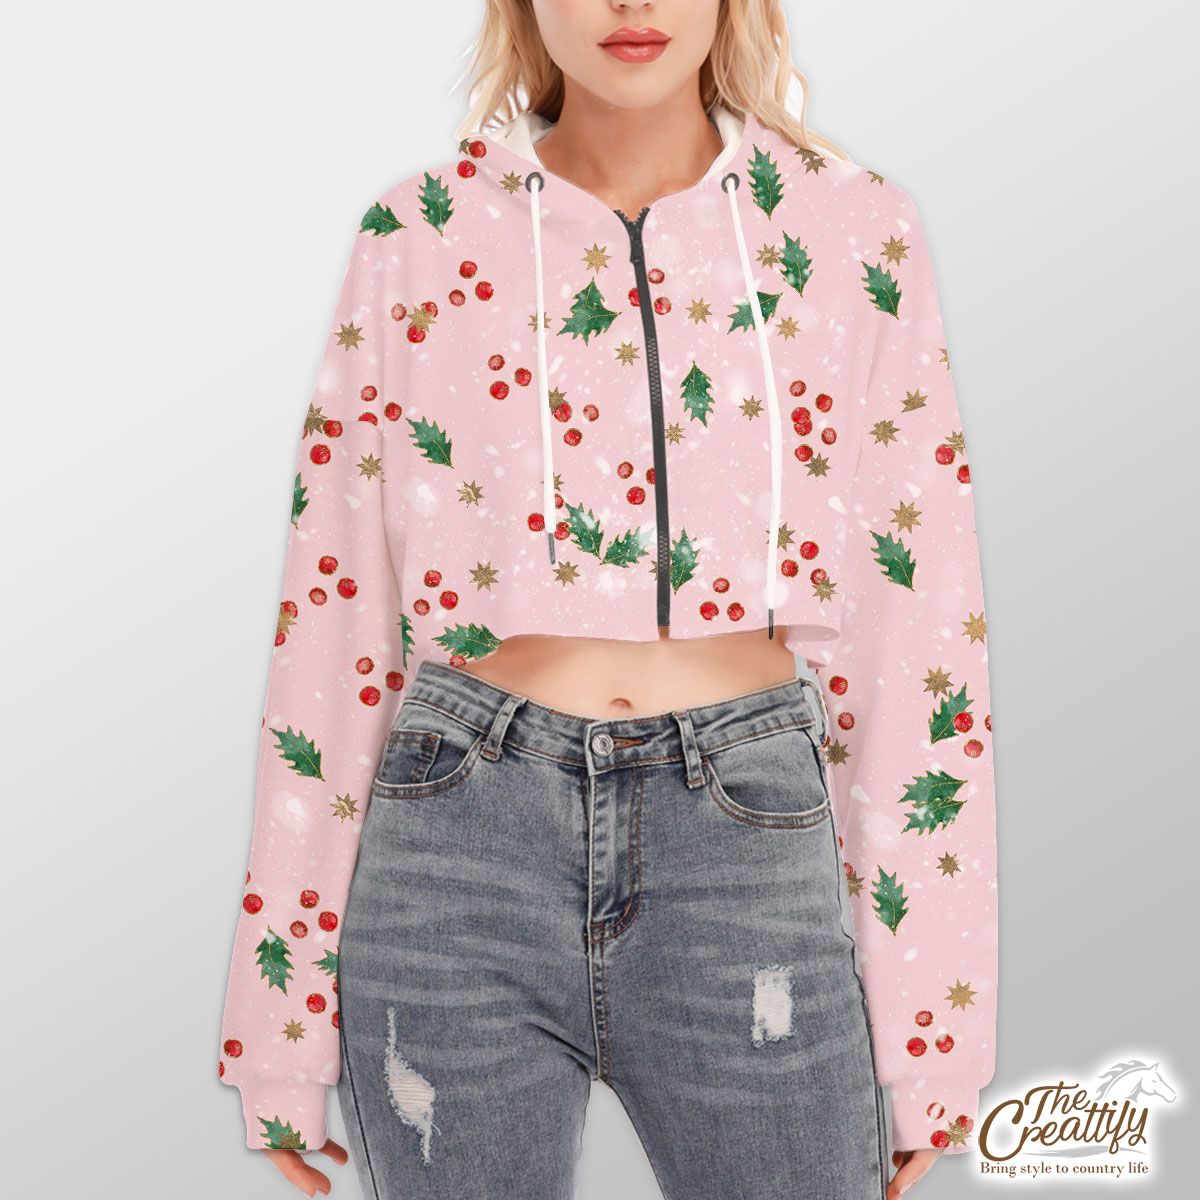 Holly Leaf With Christmas Star Pattern Hoodie With Zipper Closure